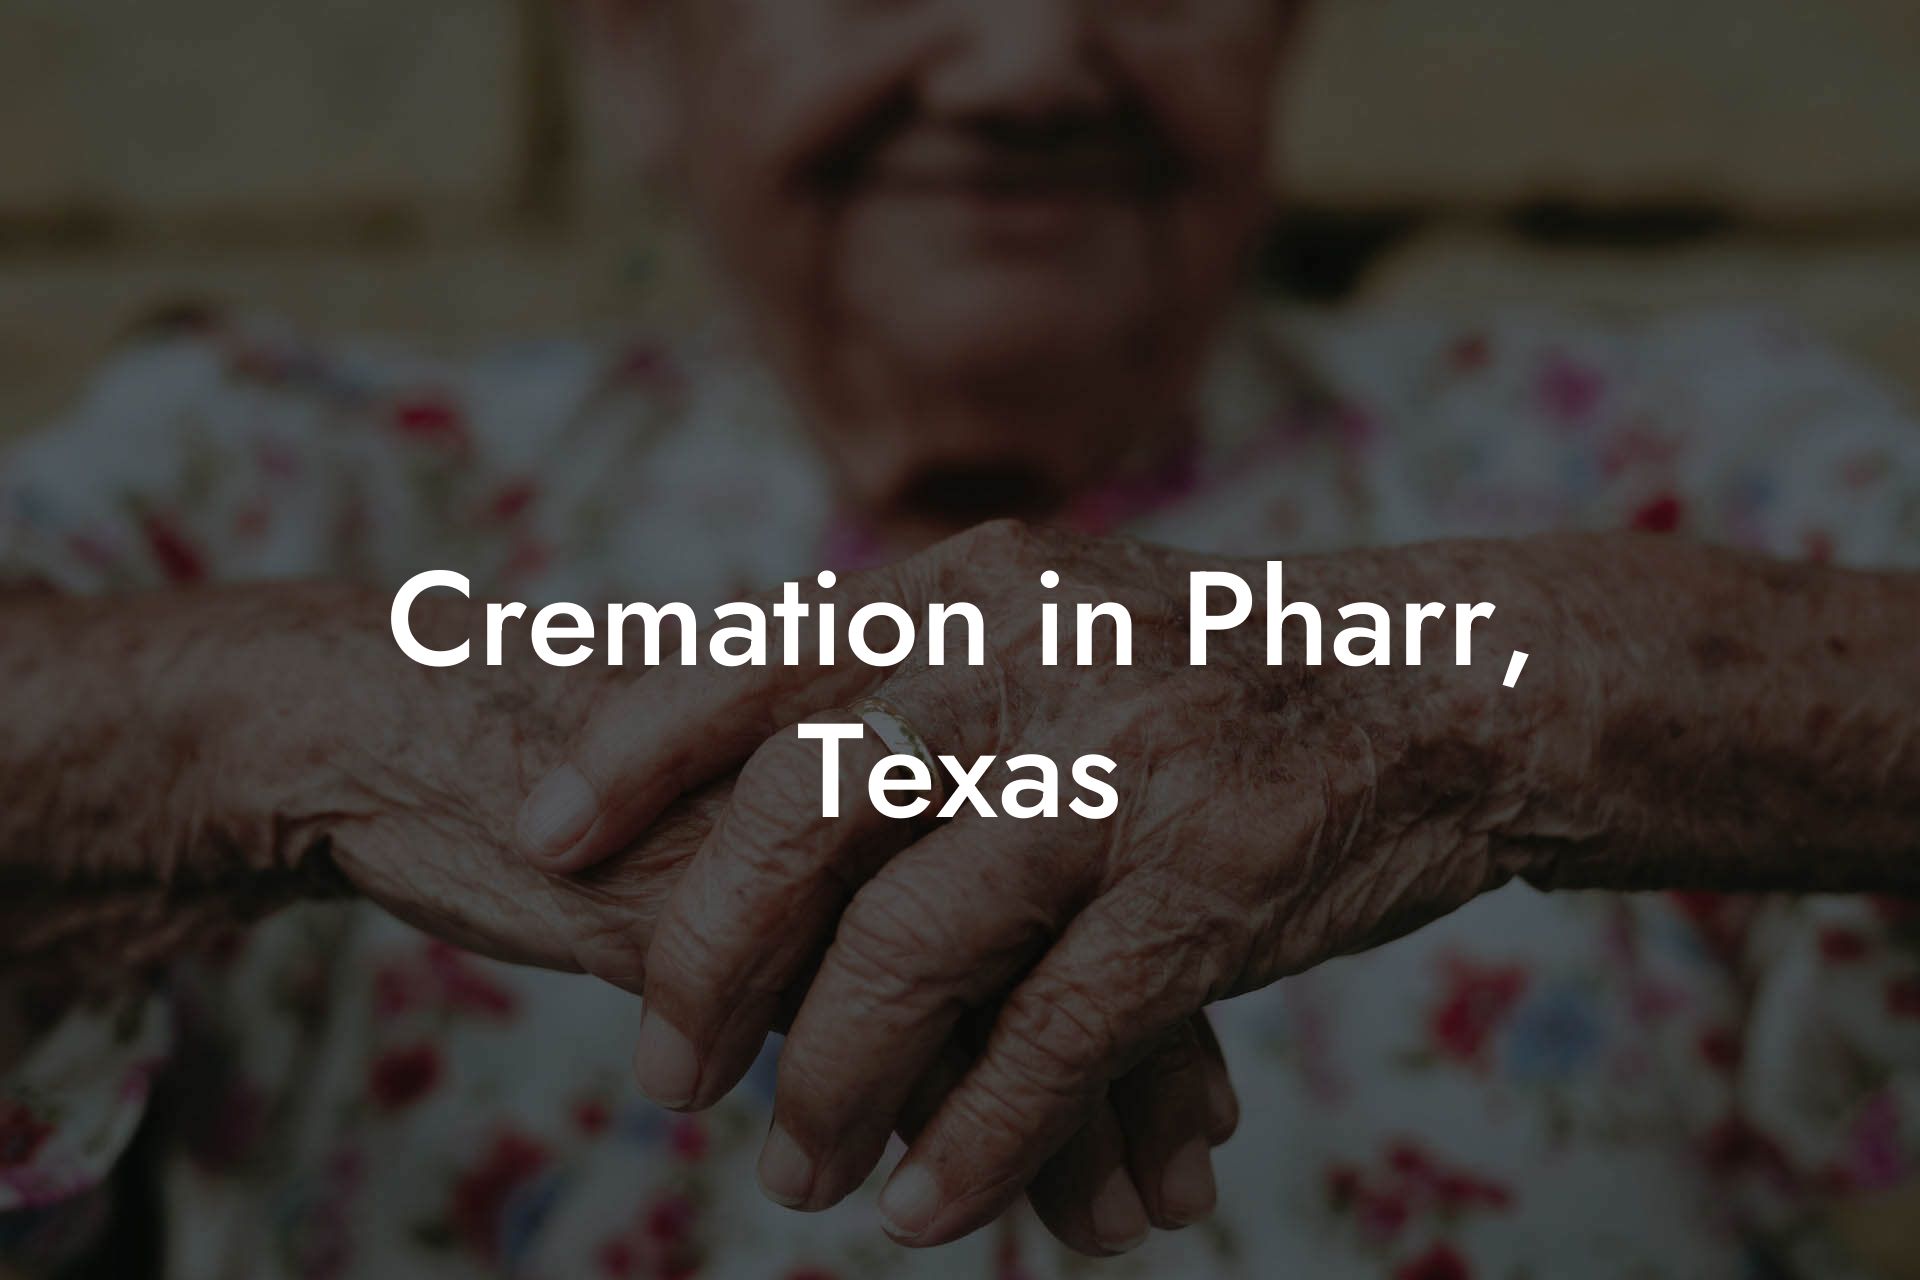 Cremation in Pharr, Texas